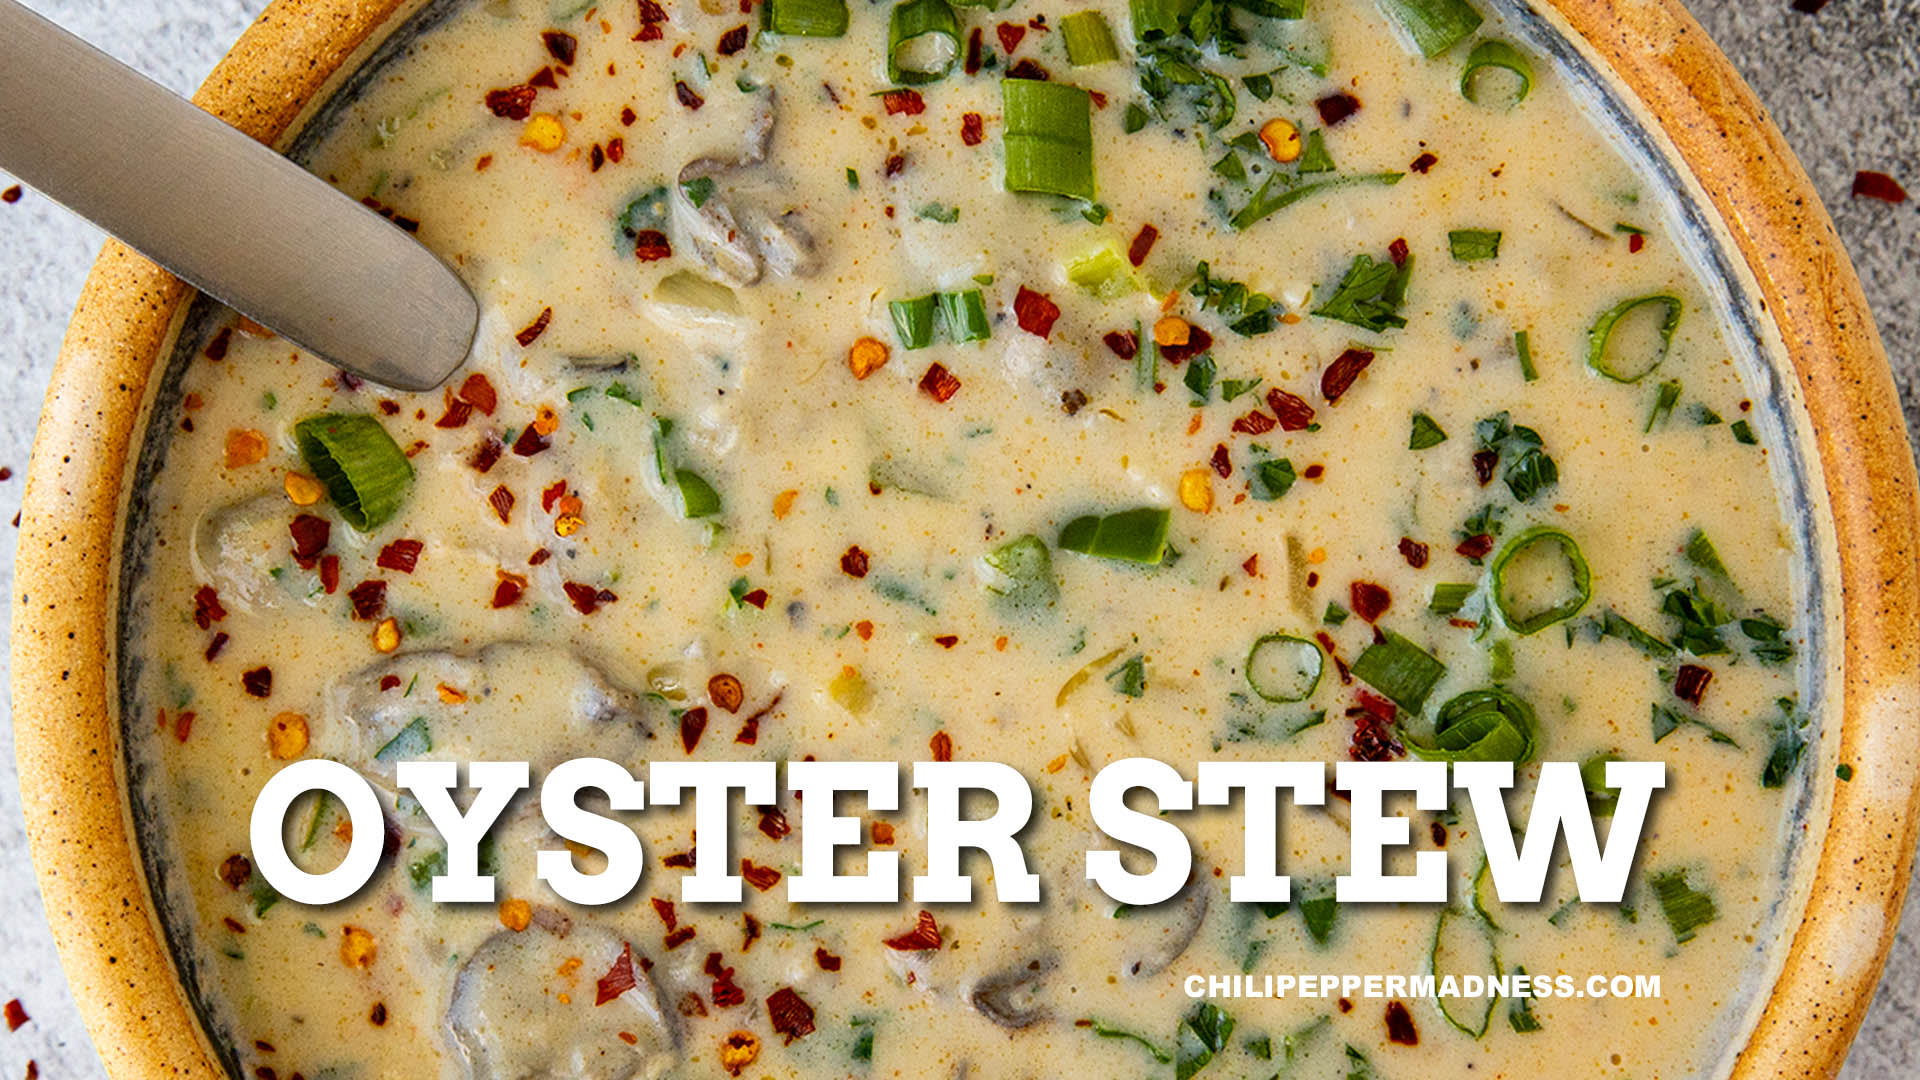 Simple Slow Cooker Oyster Stew Recipe